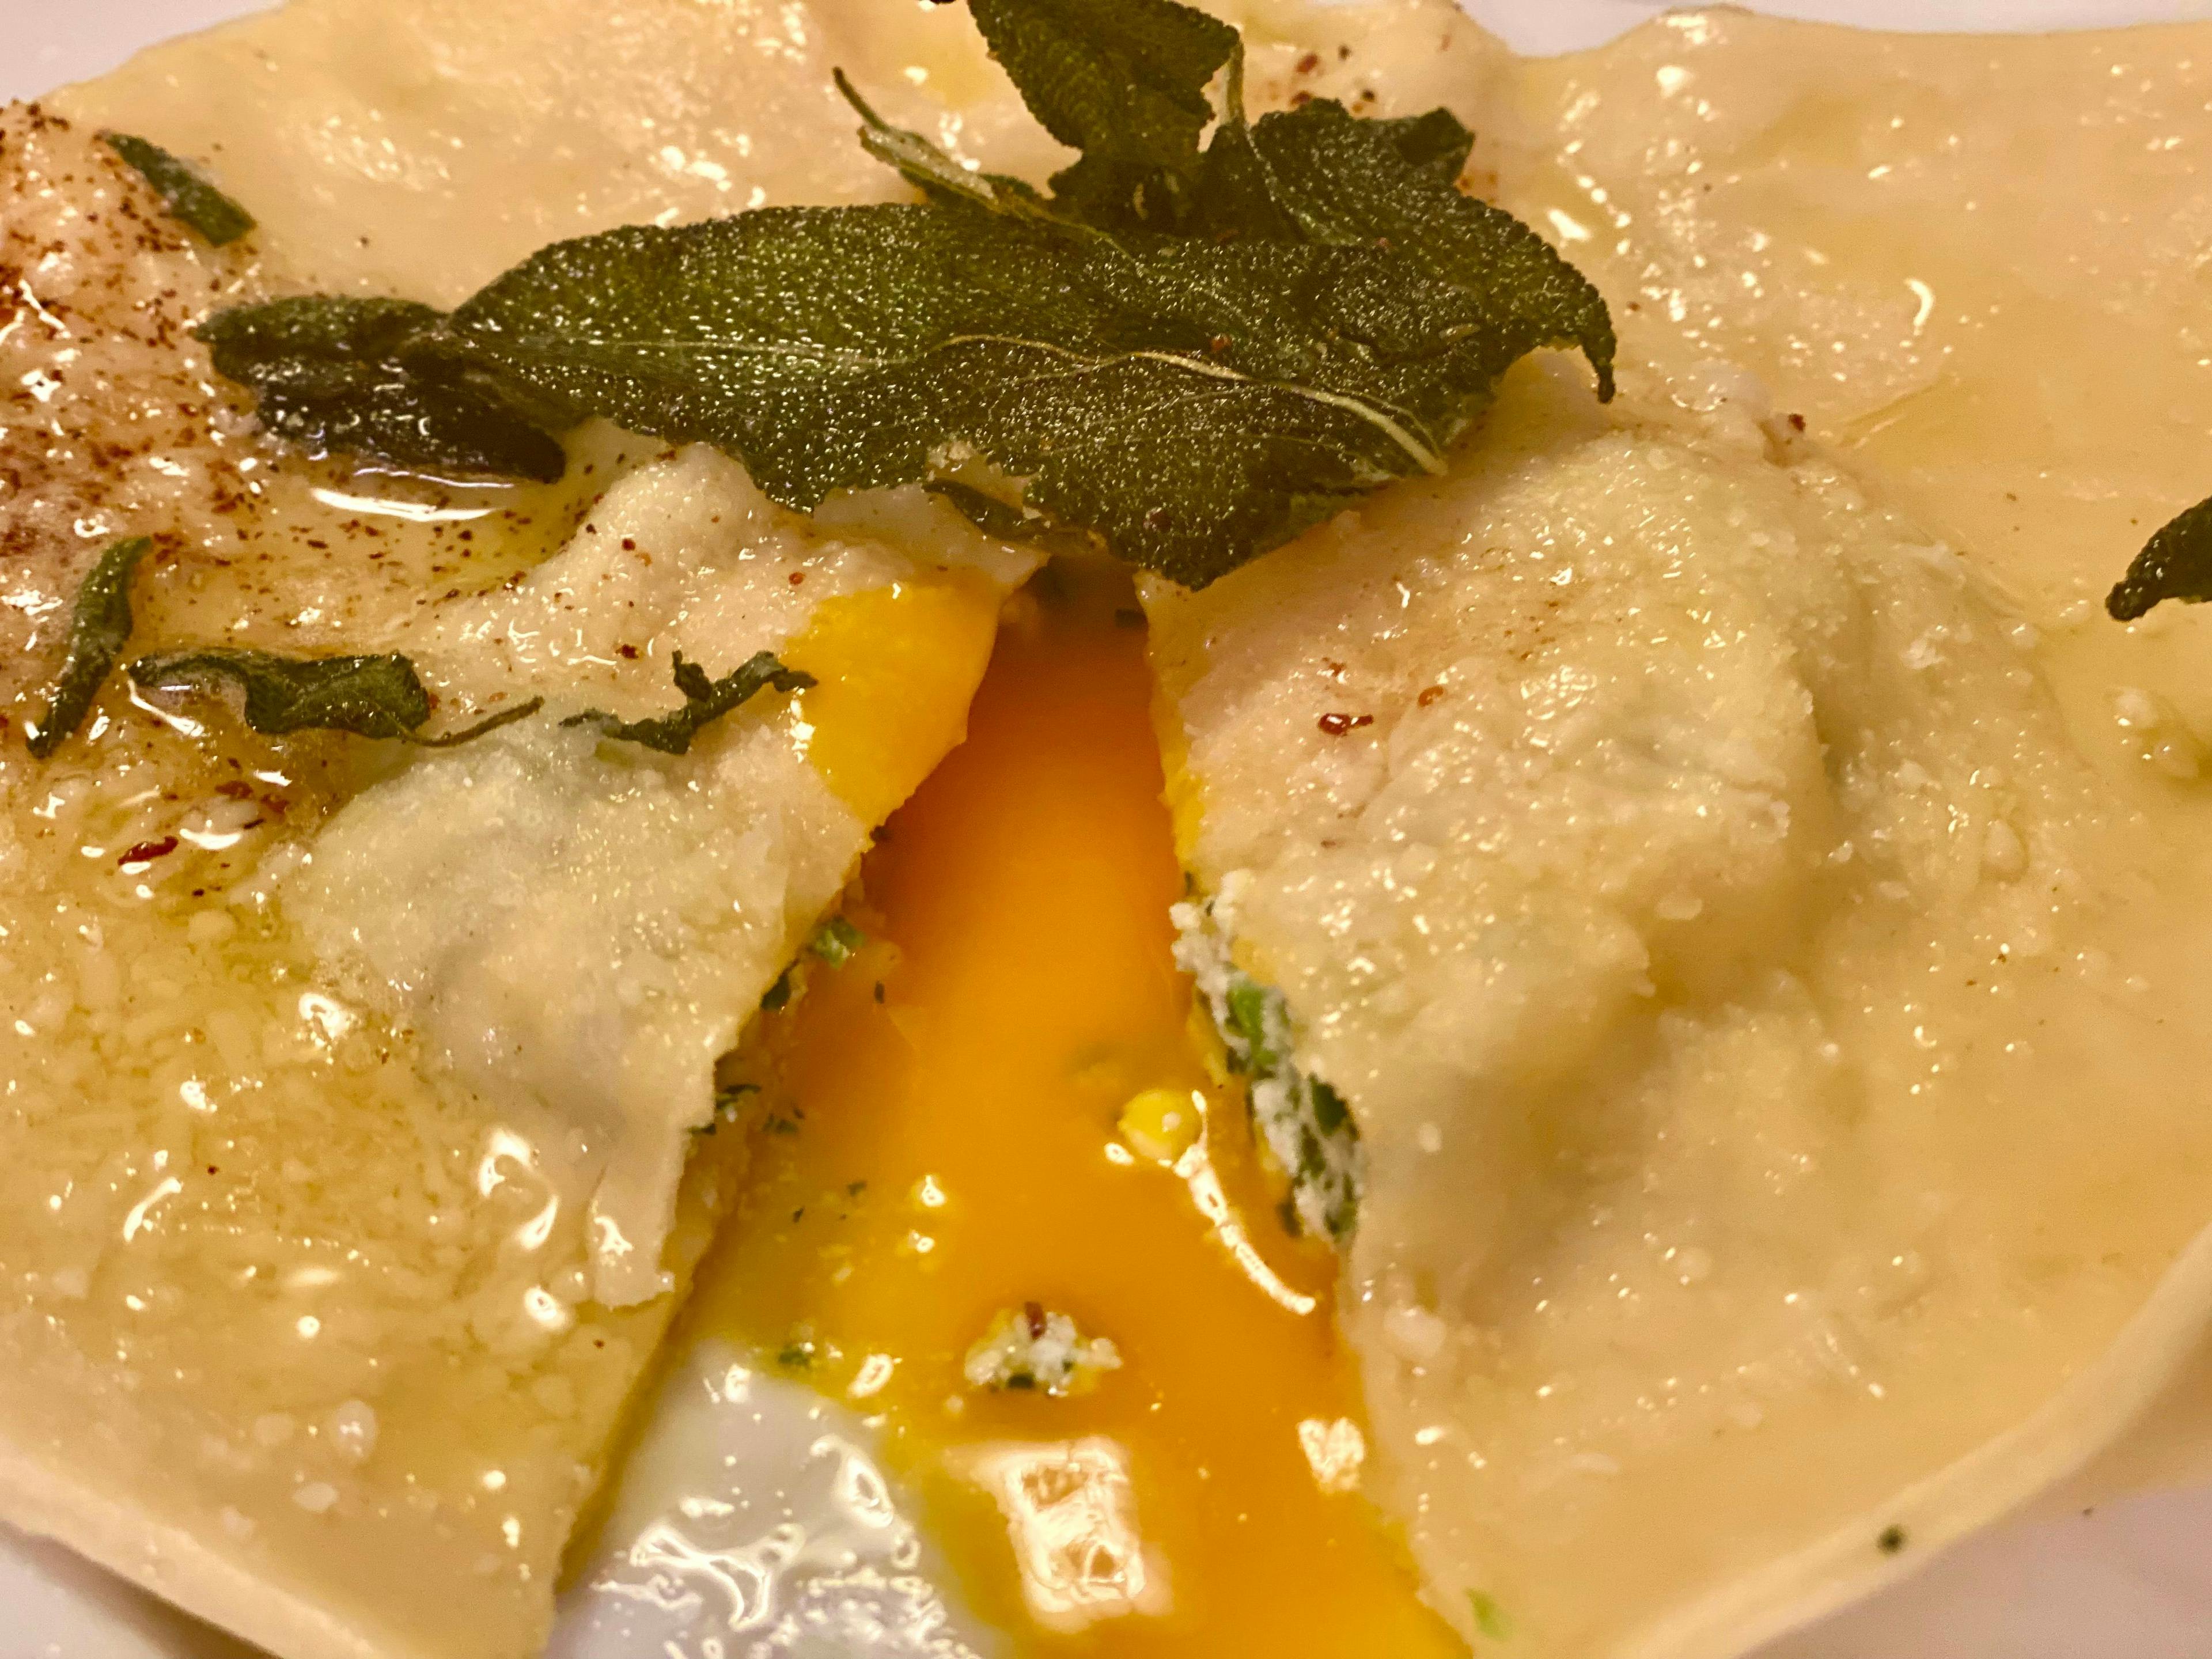  ravioloni with the egg yolk spilling out